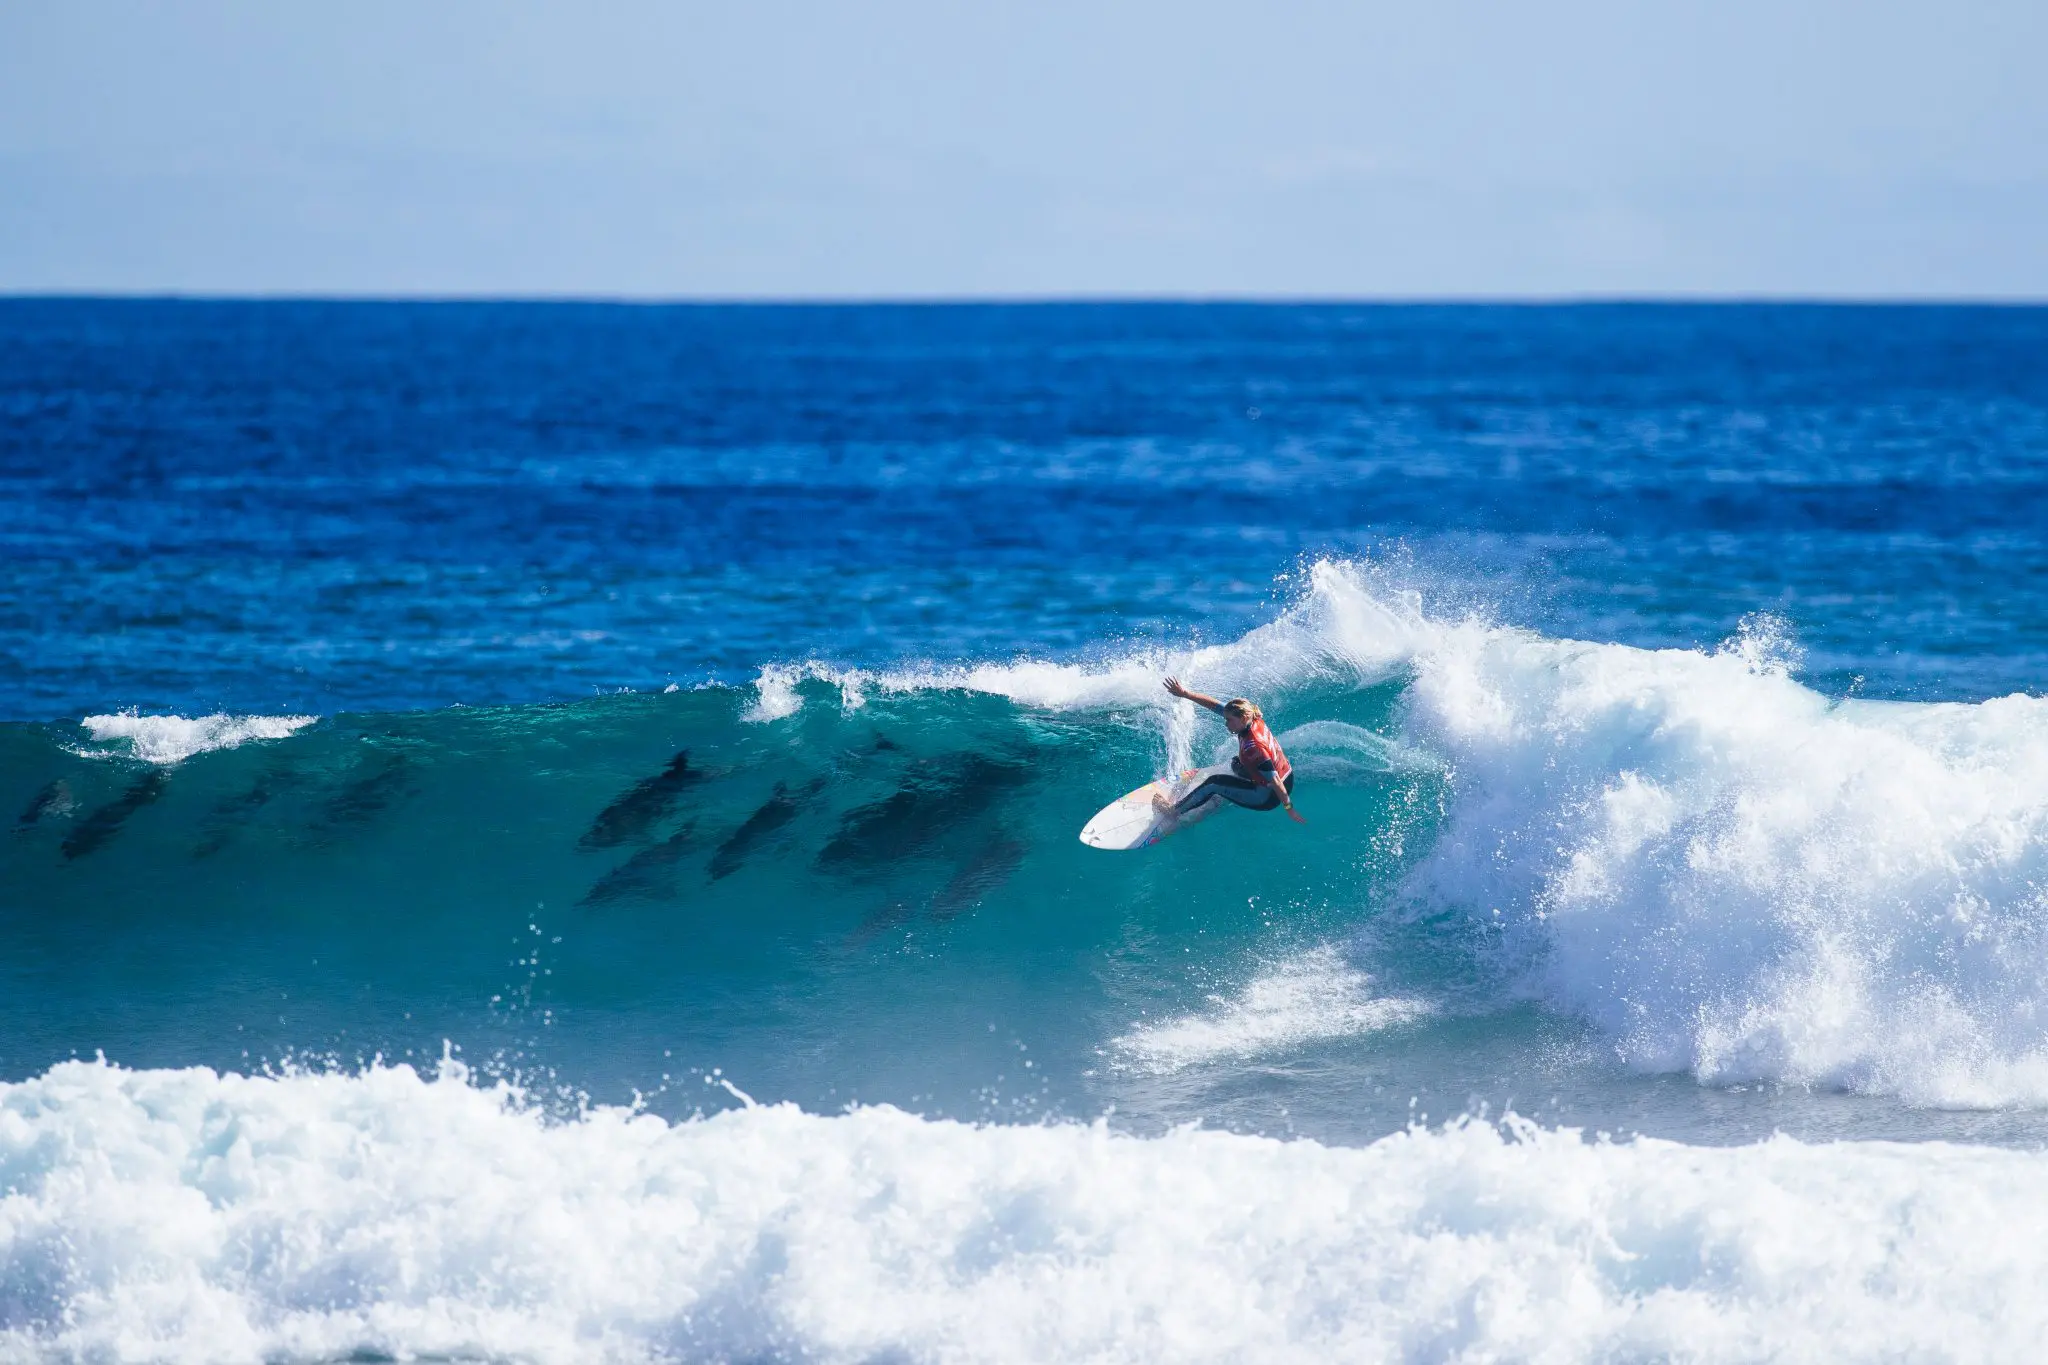 Gabriela Bryan surfing with dolphins in WSL Margaret River Pro